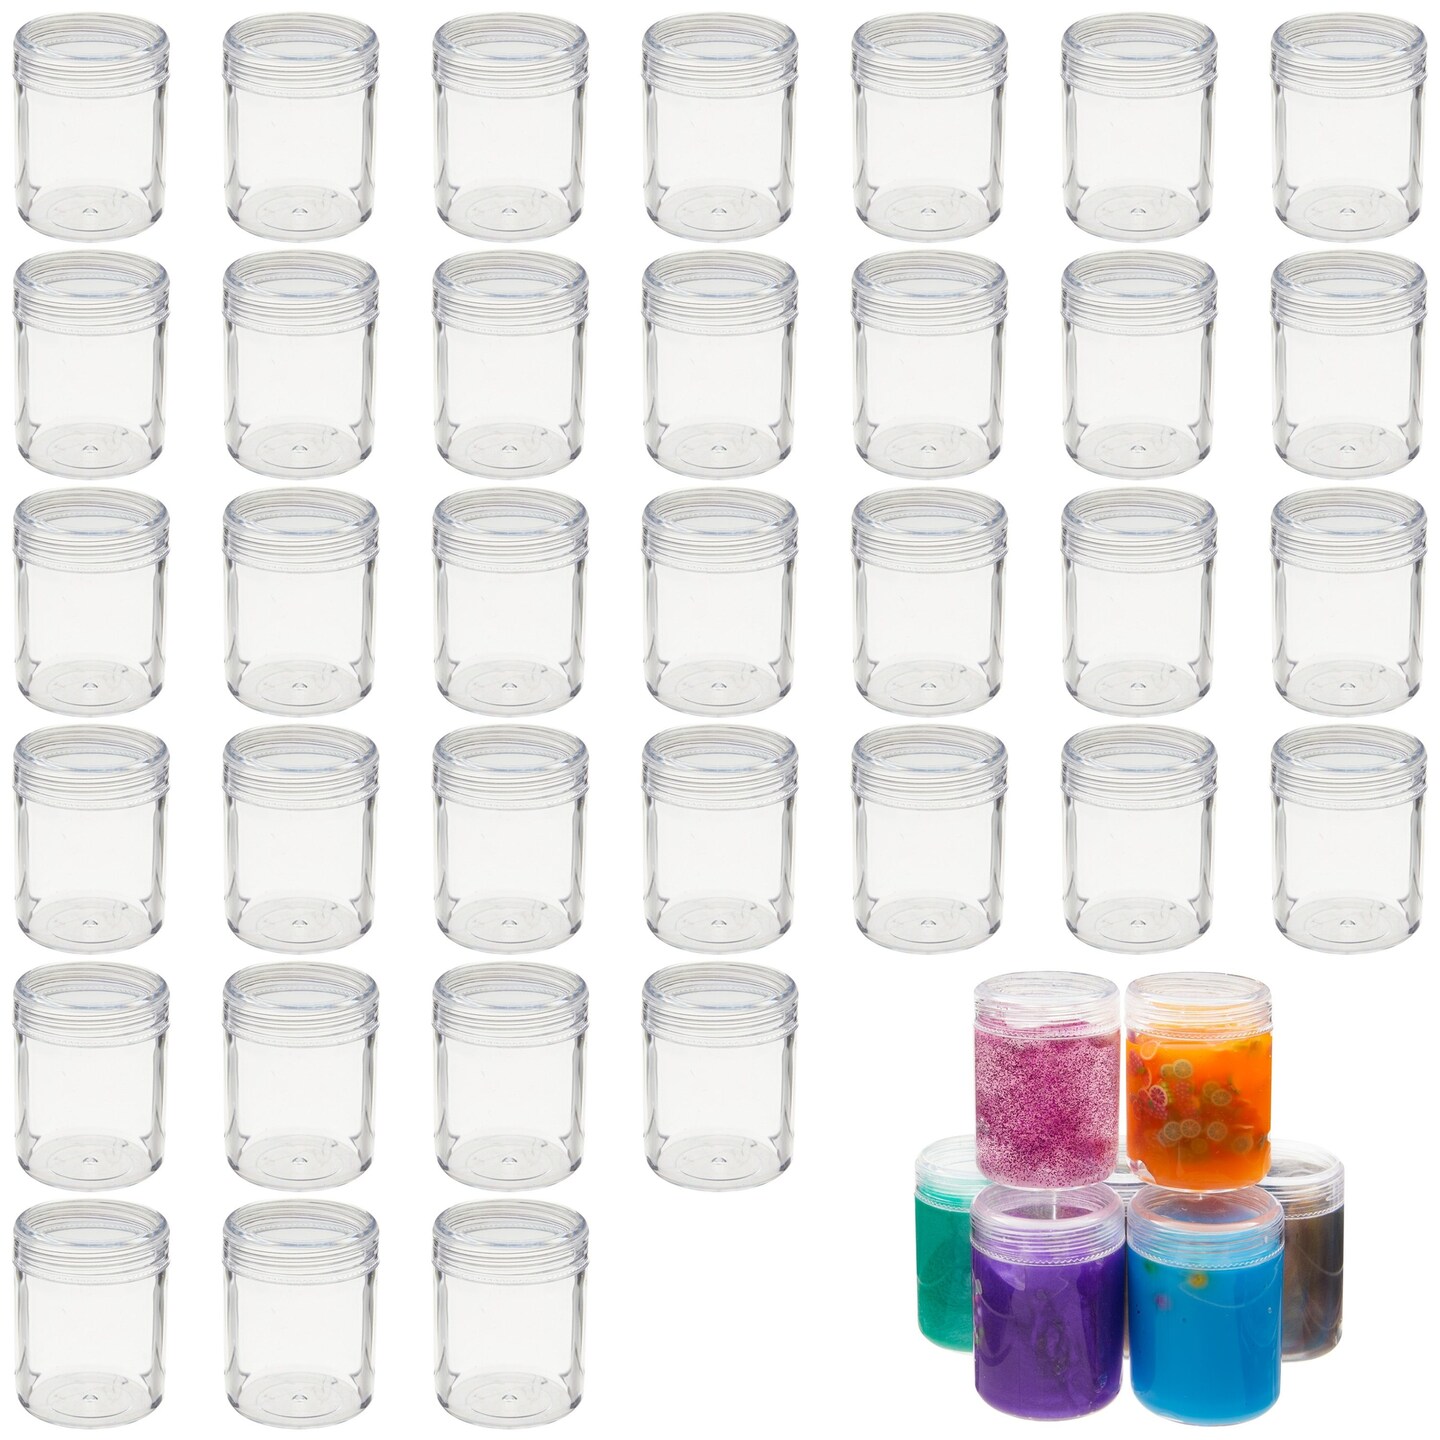 35 Pack Plastic Canning Jars with Lids for Slime, Craft Storage, Beauty  Products (1.2 oz)